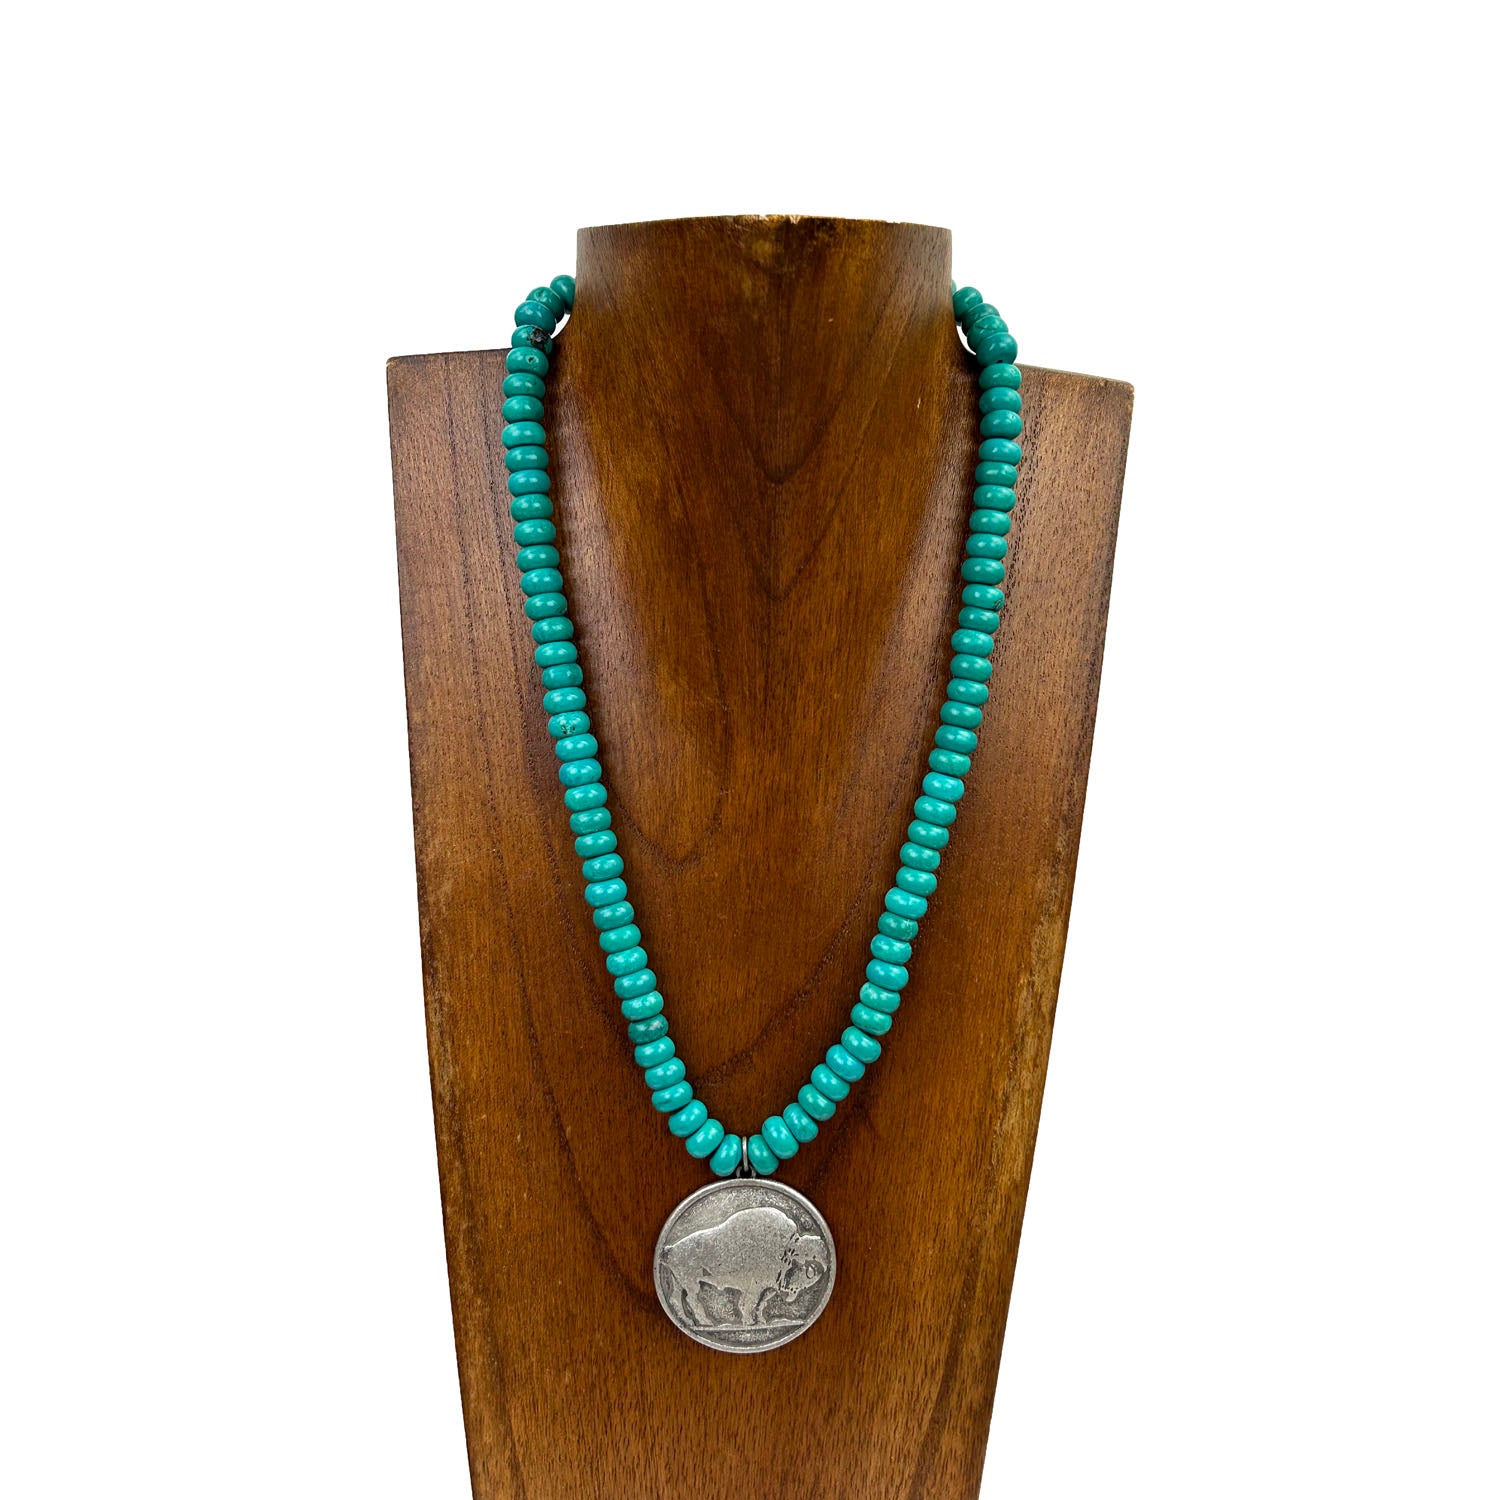 NKS230708-04       "16 Inches long blue roundel turquoise stone with  silver buffalo pendant Necklace"